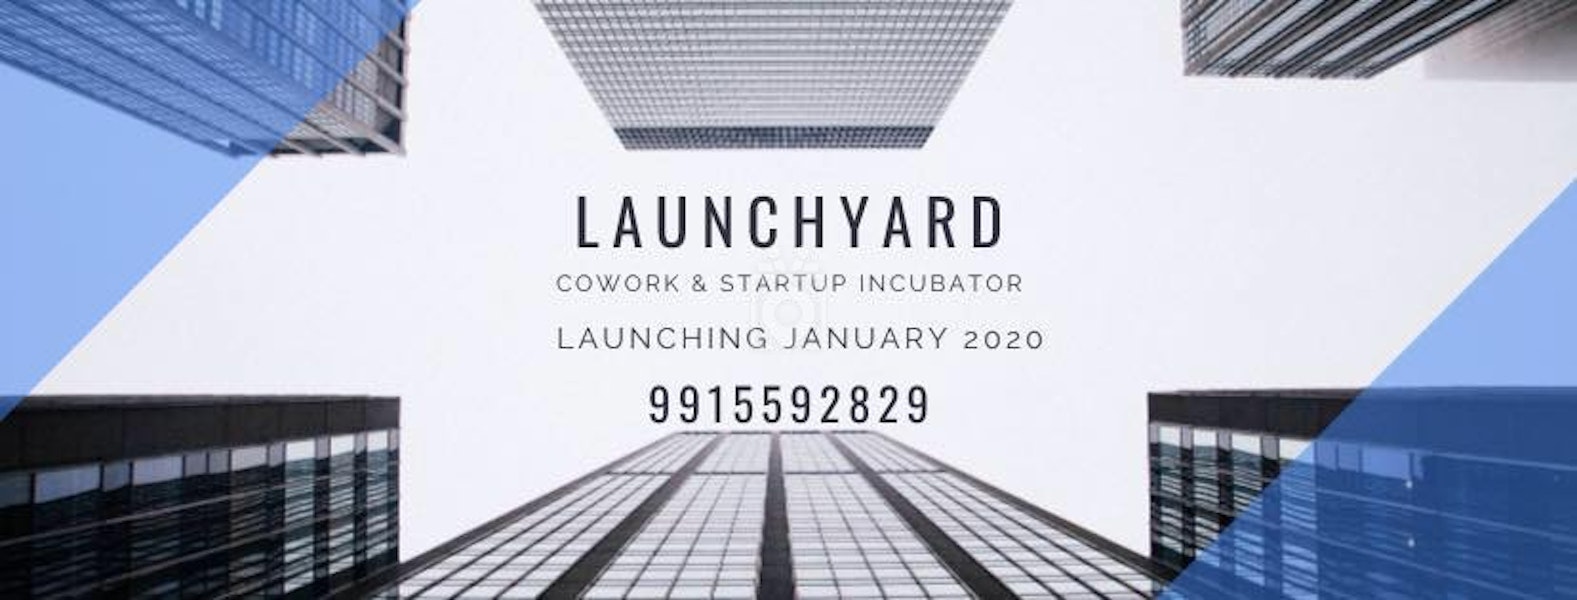 Launchyard Cowork and Start Up Incubator, New Chandigarh - Book Online ...
